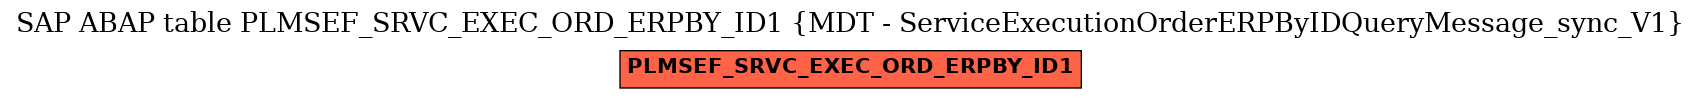 E-R Diagram for table PLMSEF_SRVC_EXEC_ORD_ERPBY_ID1 (MDT - ServiceExecutionOrderERPByIDQueryMessage_sync_V1)